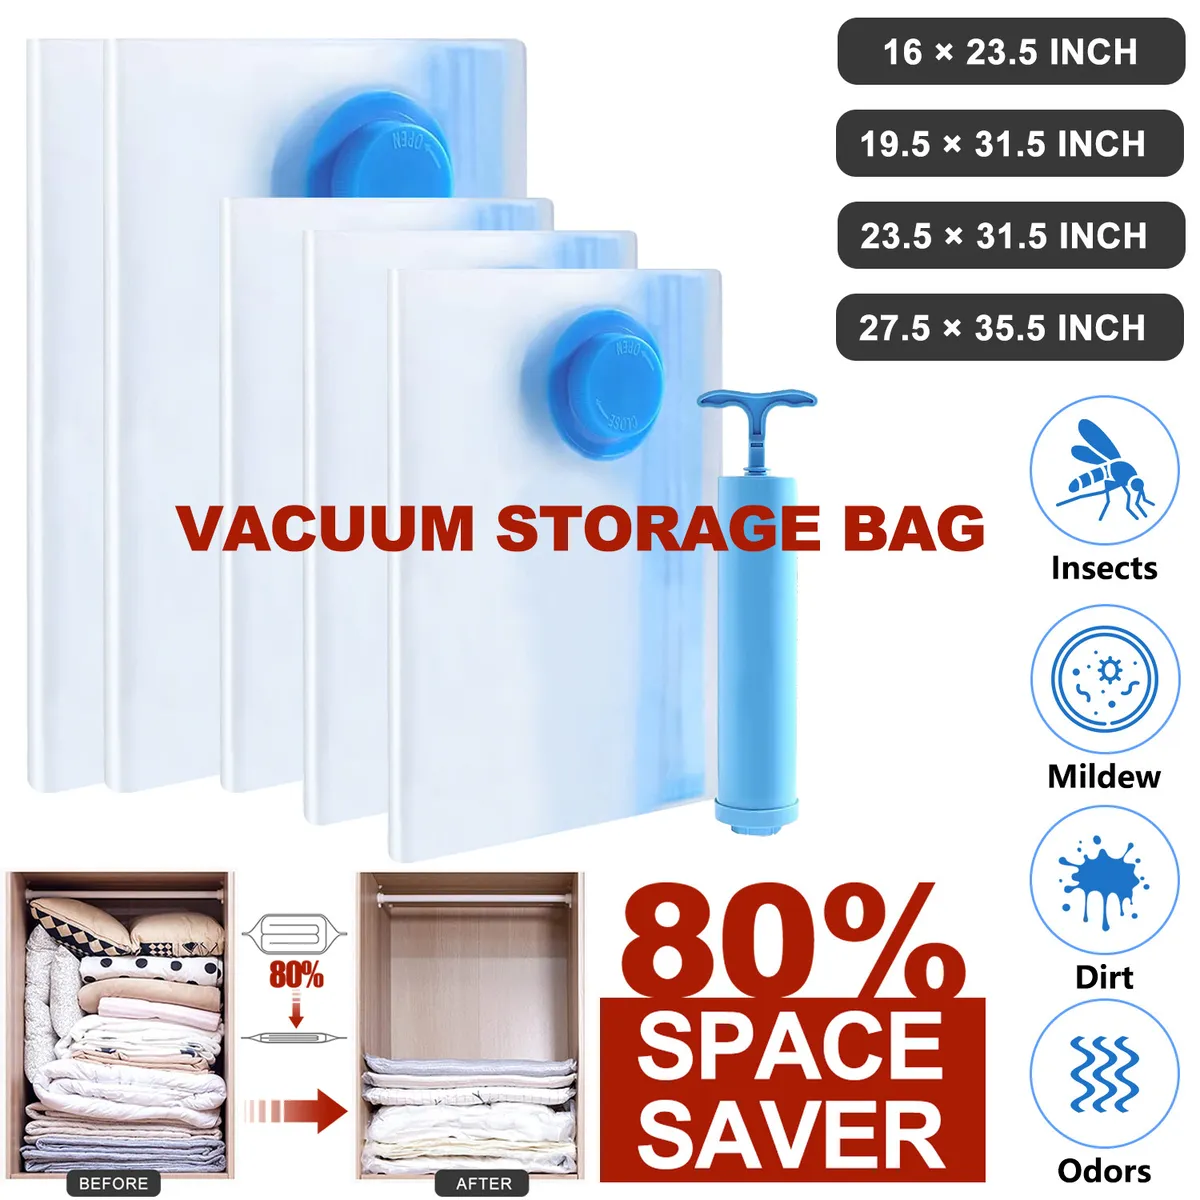 Smart Storage Vacuum Storage Bags, 16 Pack Space Saver Bags for Clothes,  Pillows & Bedding, Travel Luggage | Vacuum Seal Storage Bags